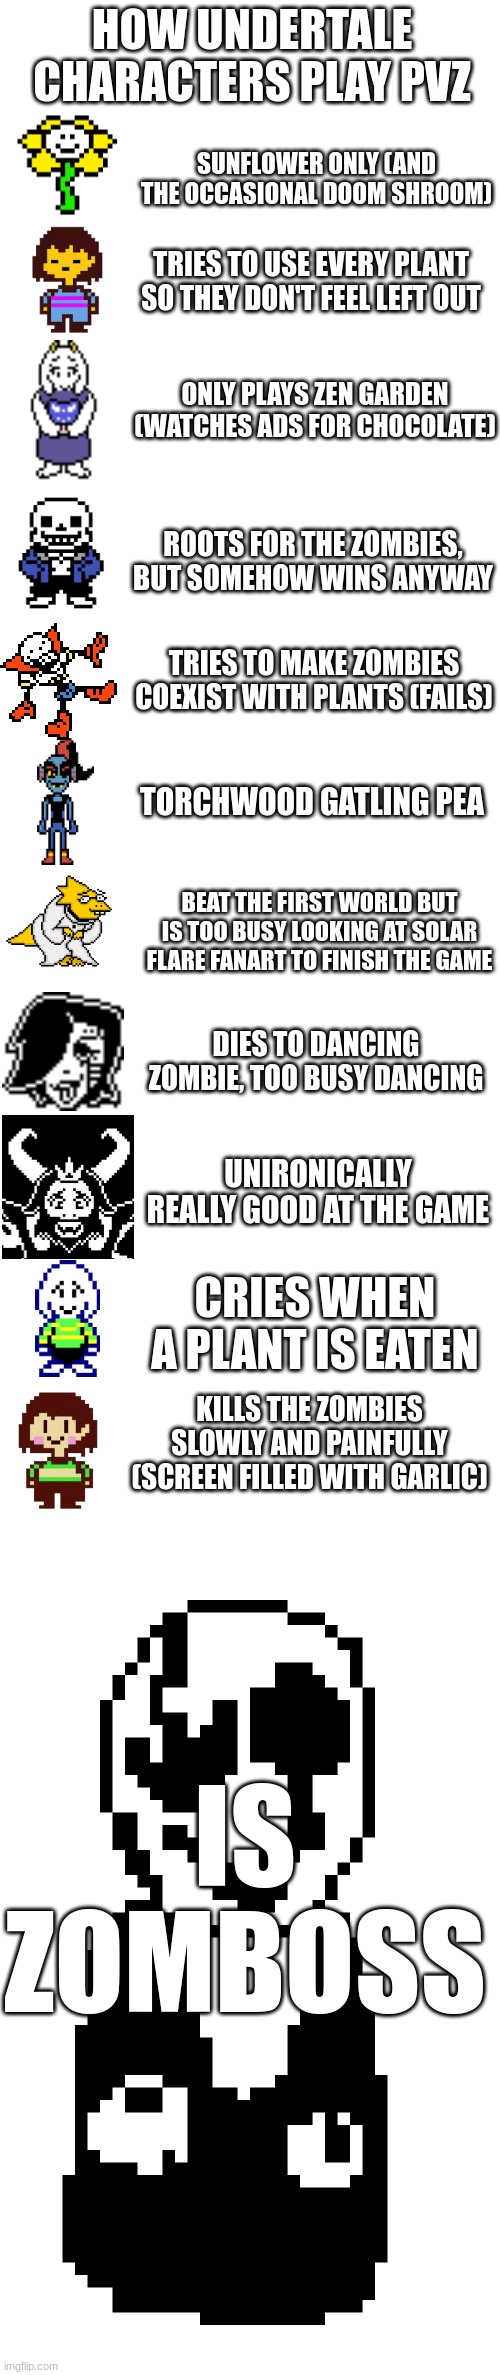 HOW UNDERTALE CHARACTERS PLAY PVZ; SUNFLOWER ONLY (AND THE OCCASIONAL DOOM SHROOM); TRIES TO USE EVERY PLANT SO THEY DON'T FEEL LEFT OUT; ONLY PLAYS ZEN GARDEN (WATCHES ADS FOR CHOCOLATE); ROOTS FOR THE ZOMBIES, BUT SOMEHOW WINS ANYWAY; TRIES TO MAKE ZOMBIES COEXIST WITH PLANTS (FAILS); TORCHWOOD GATLING PEA; BEAT THE FIRST WORLD BUT IS TOO BUSY LOOKING AT SOLAR FLARE FANART TO FINISH THE GAME; DIES TO DANCING ZOMBIE, TOO BUSY DANCING; UNIRONICALLY REALLY GOOD AT THE GAME; CRIES WHEN A PLANT IS EATEN; KILLS THE ZOMBIES SLOWLY AND PAINFULLY (SCREEN FILLED WITH GARLIC); IS ZOMBOSS | image tagged in blank white template,w d gaster | made w/ Imgflip meme maker